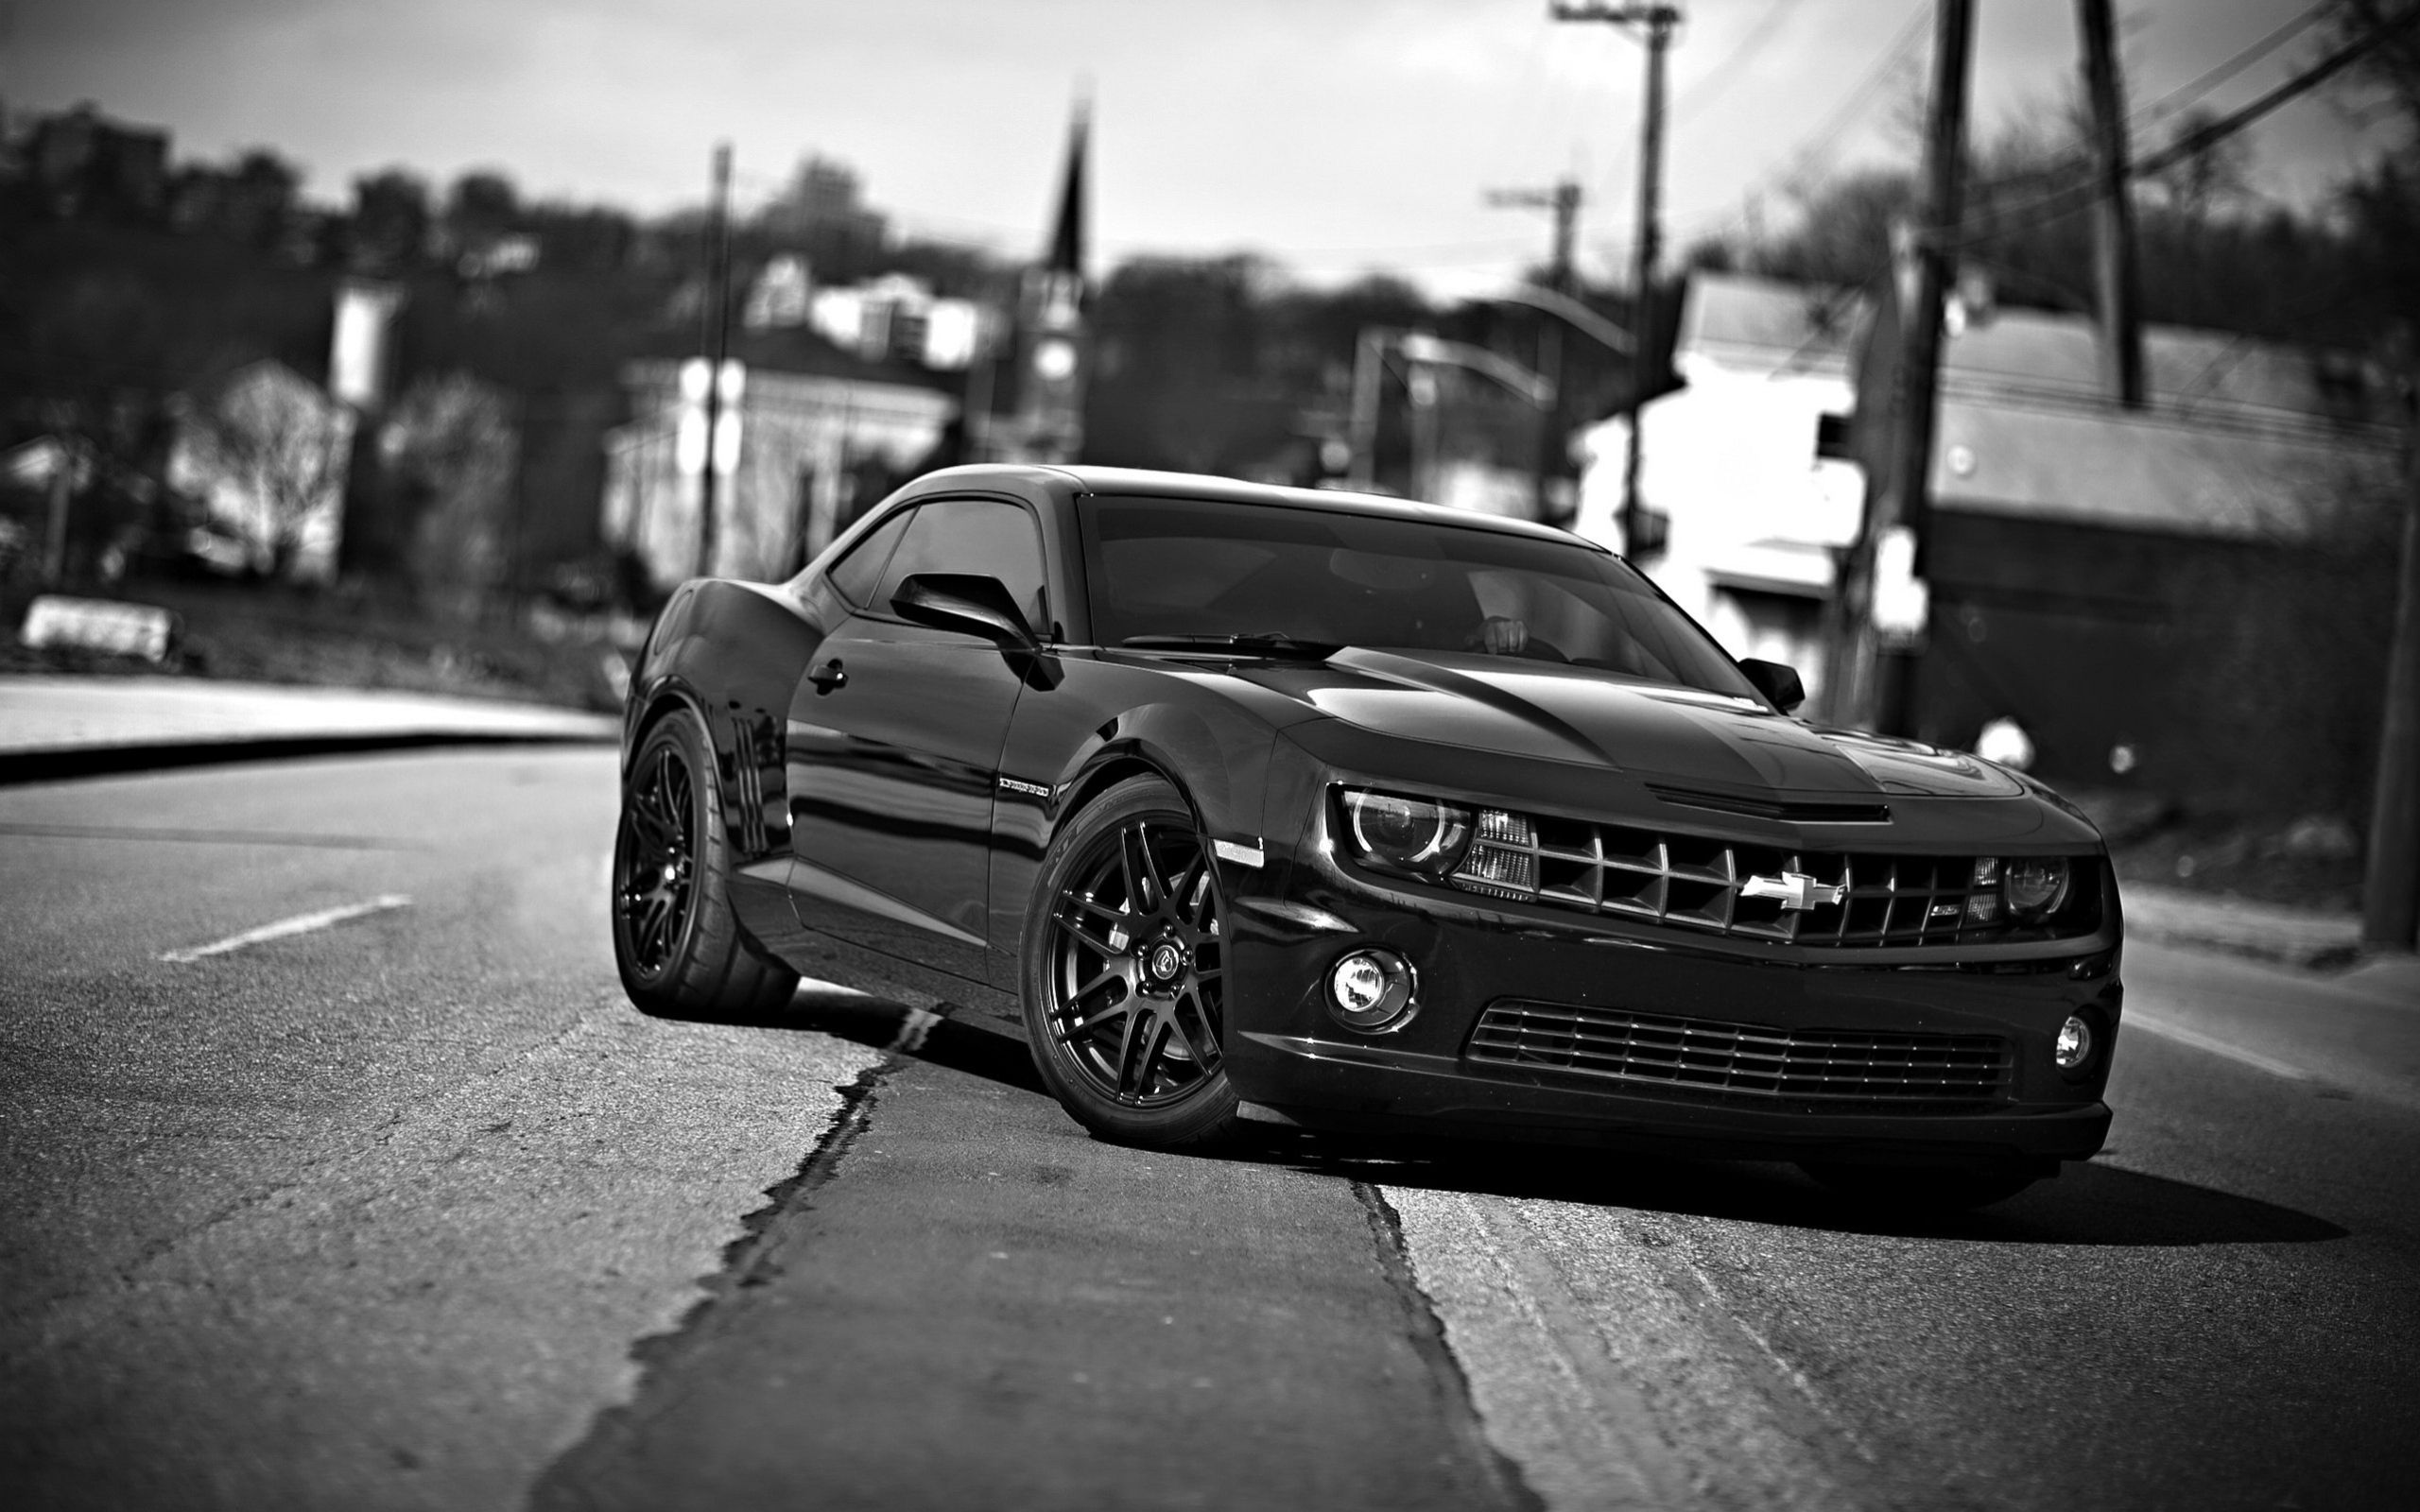 auto, front view, chevrolet camaro, cars, chb, chevrolet, bw